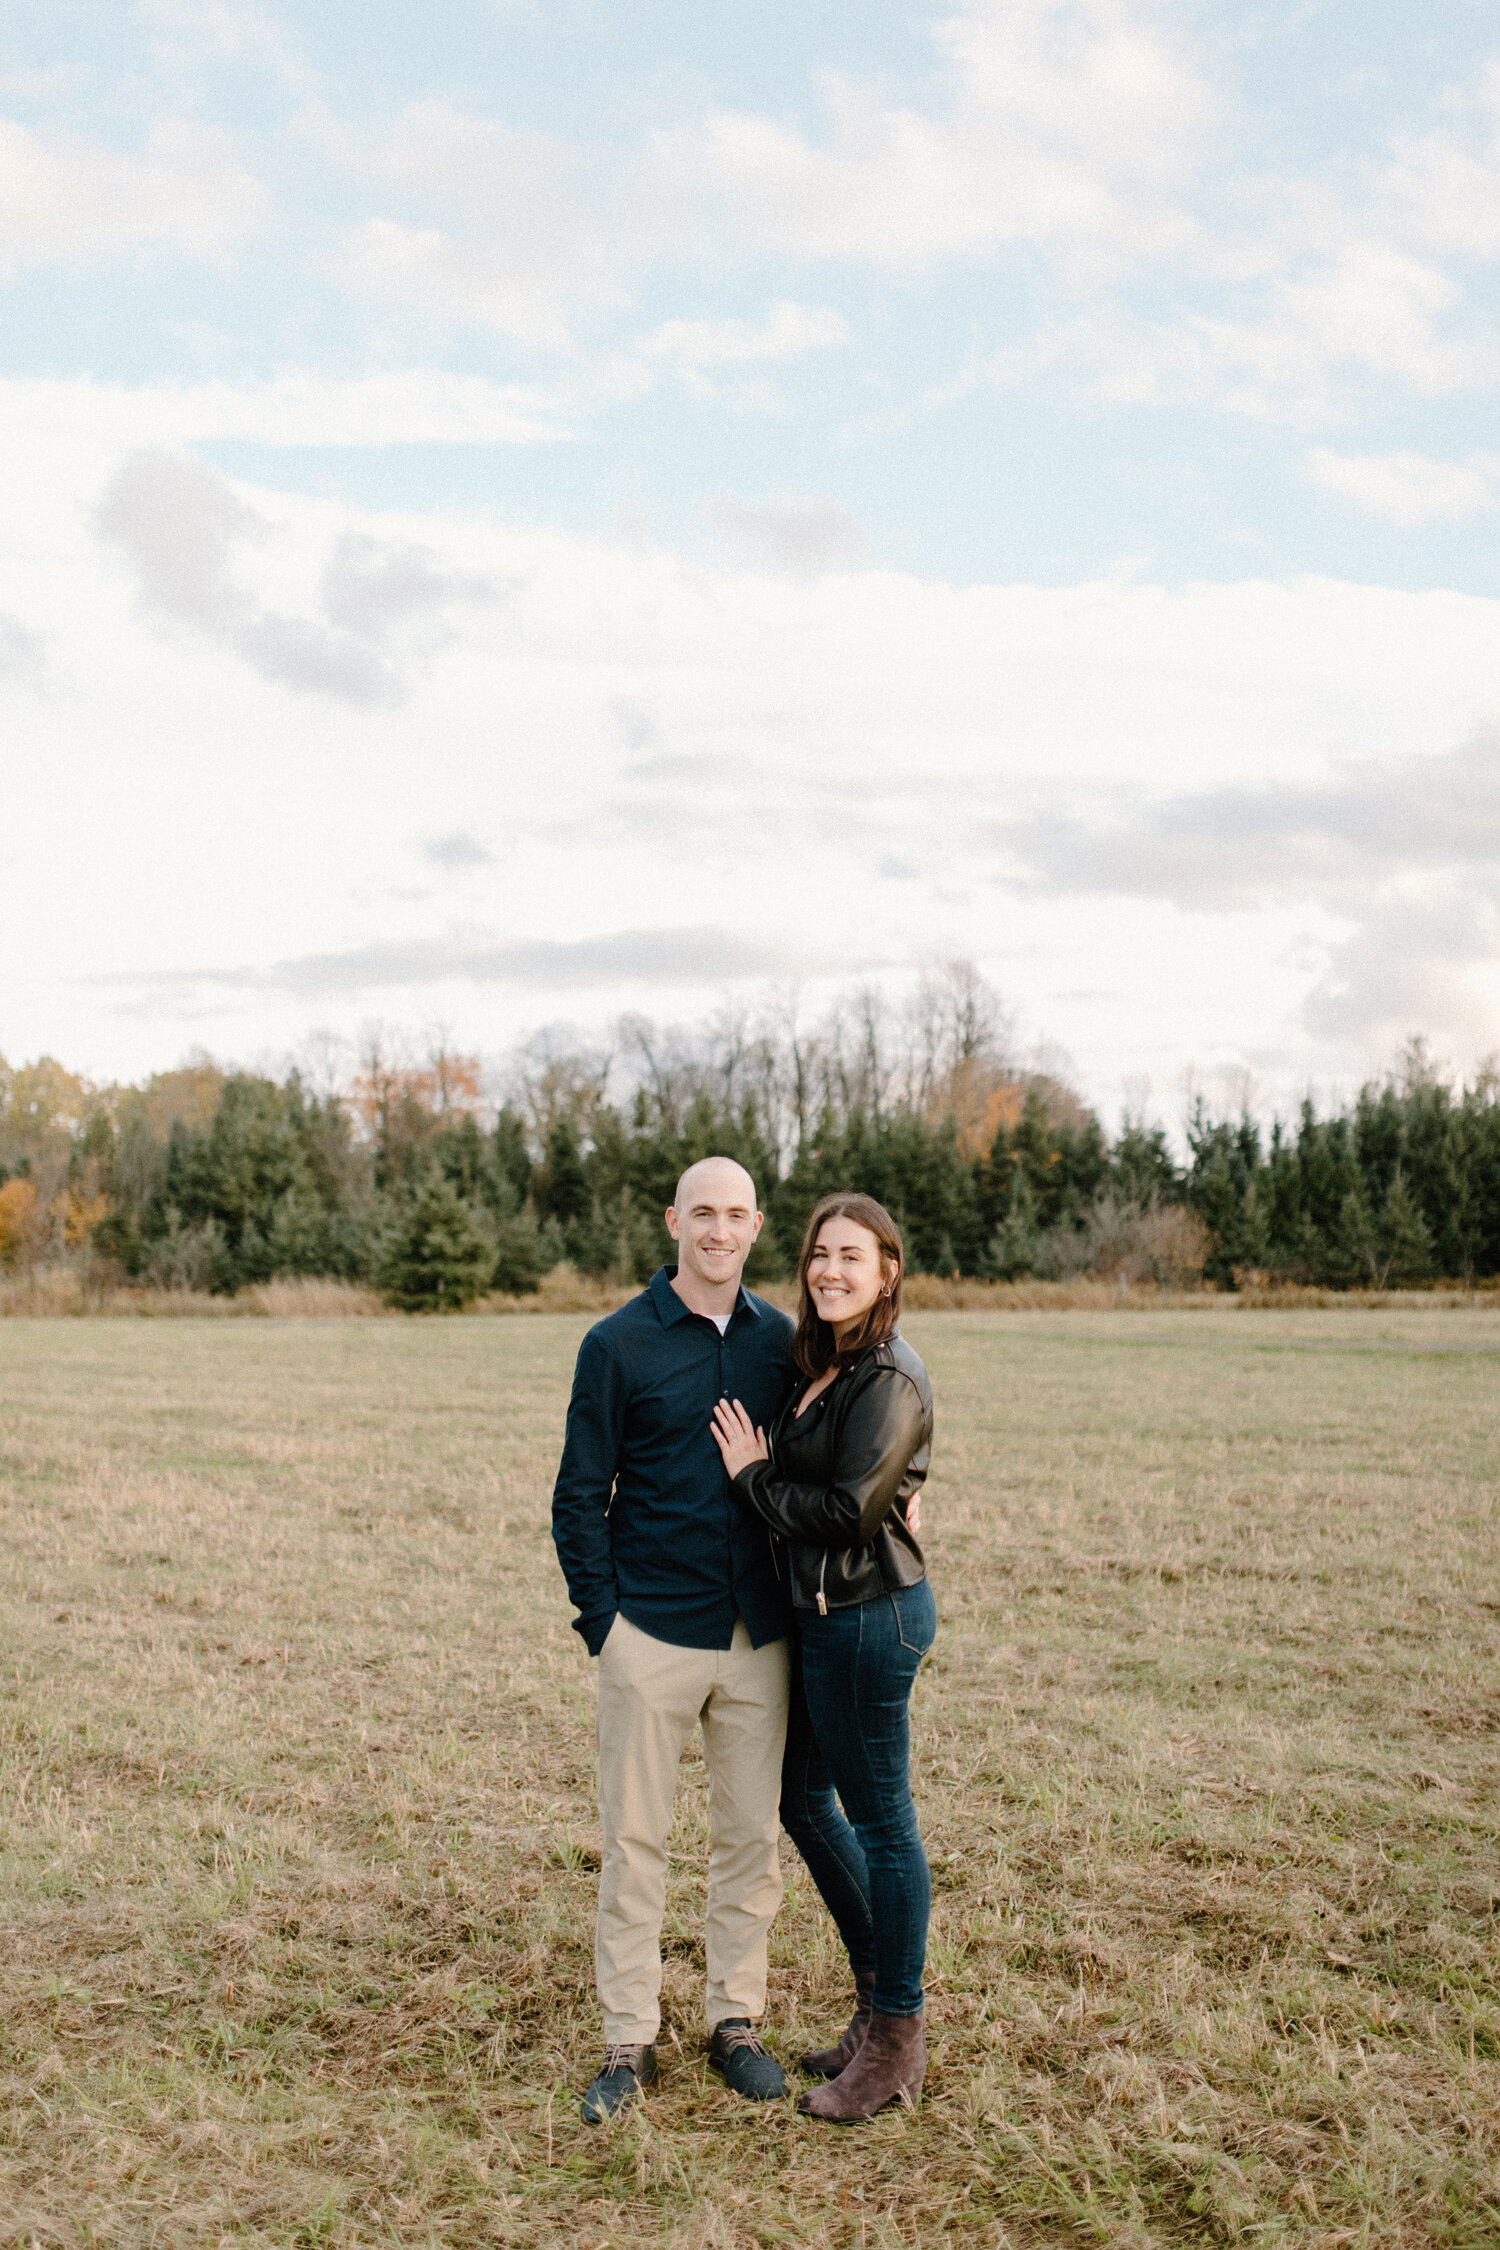  Posed in an open grass field in Ontario, Canada, Chelsea Mason Photography captures this fiance placing her hand on her soon-to-be groom’s chest and smiling. couple posing together womens leather black jacket mens khaki pants with black button up sh